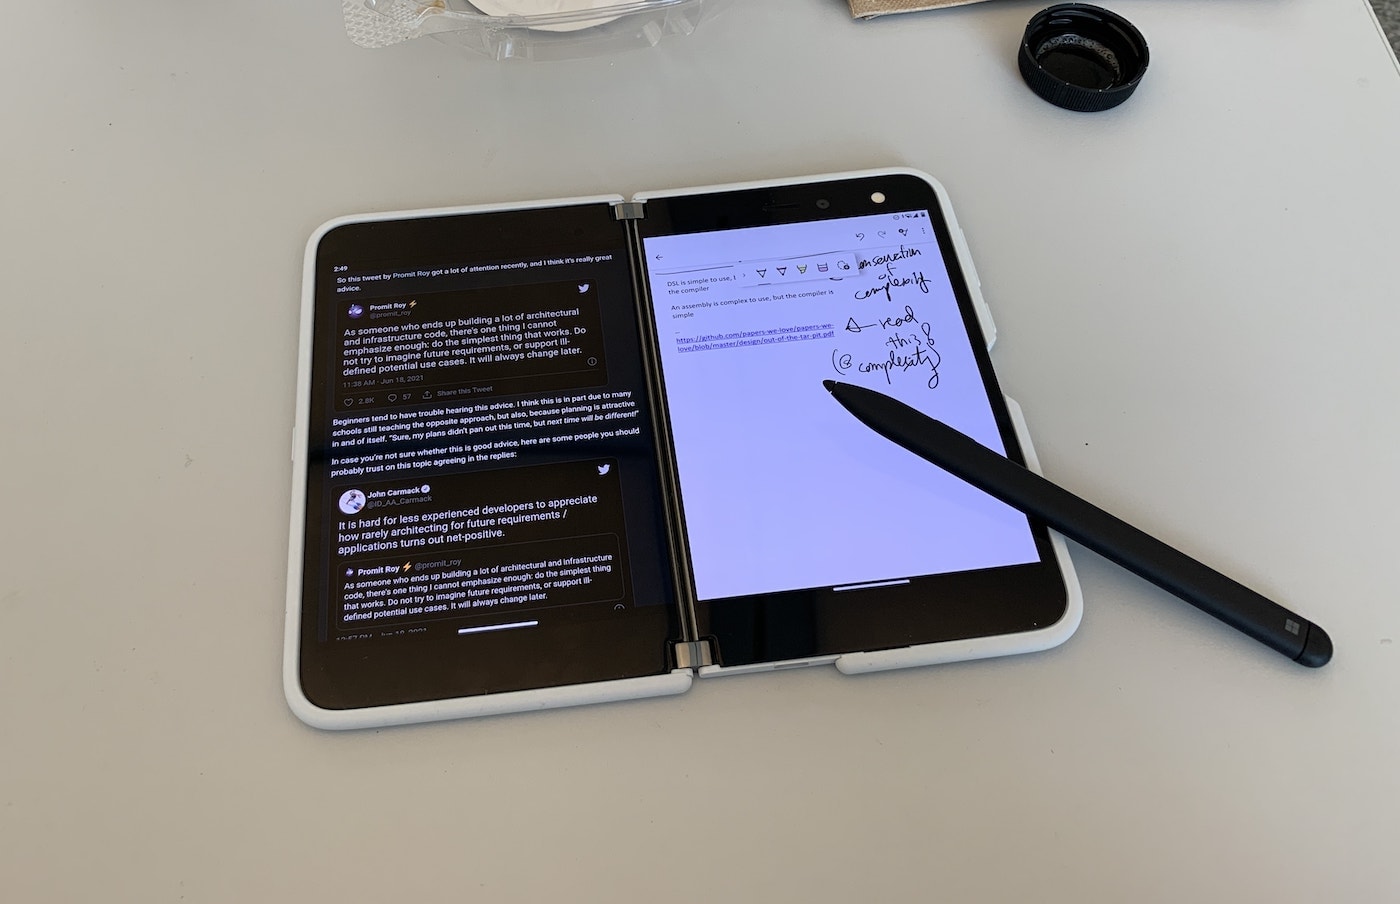 A Surface Duo on a table, with a webpage on the left screen and a note-taking app with some handwritten notes on the right screen